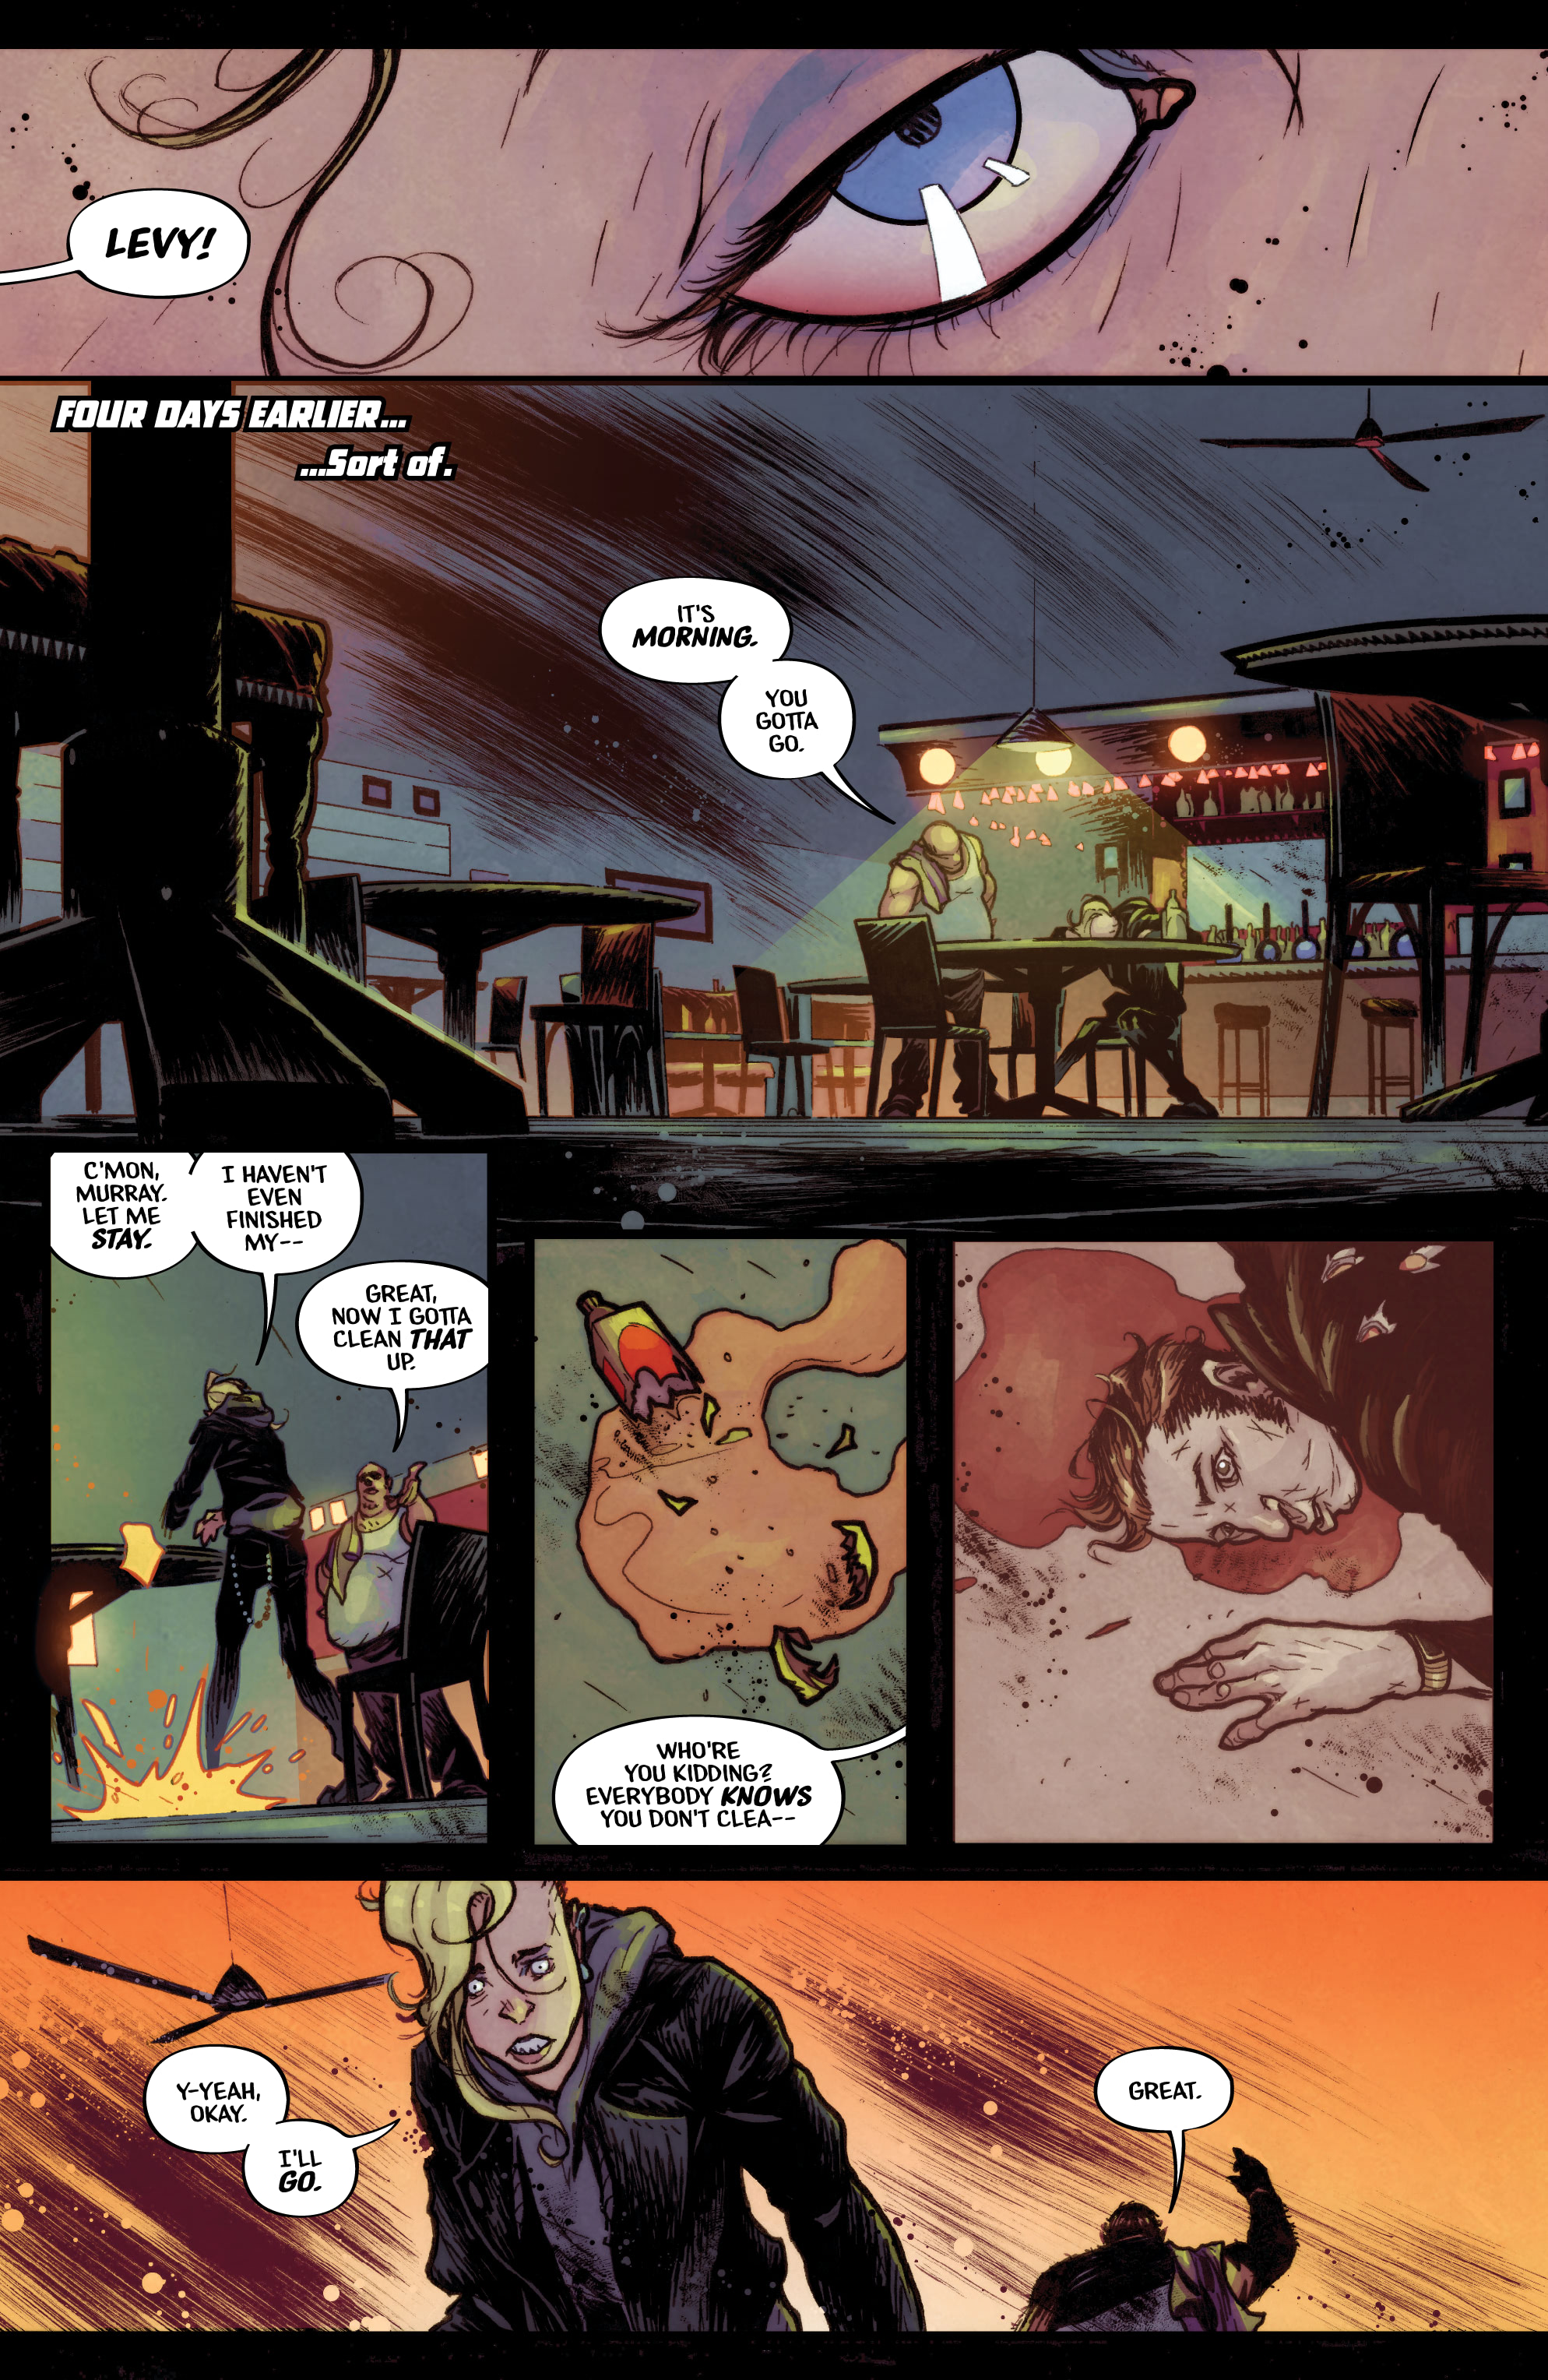 Backtrack (2020-): Chapter 1 - Page 4